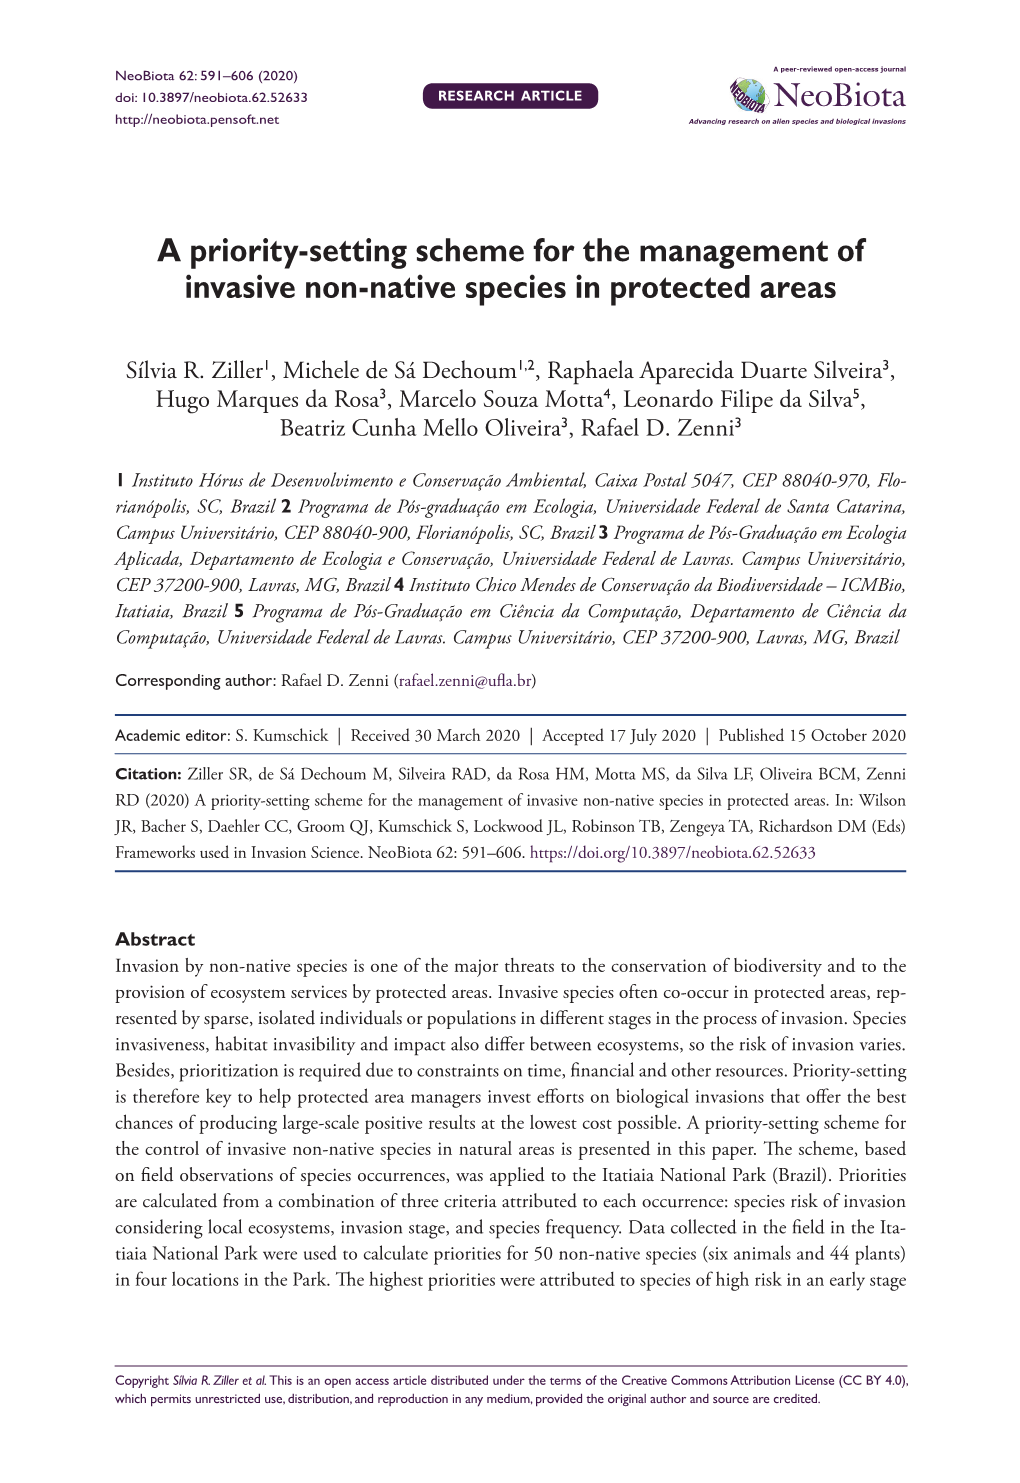 A Priority-Setting Scheme for the Management of Invasive Non-Native Species in Protected Areas